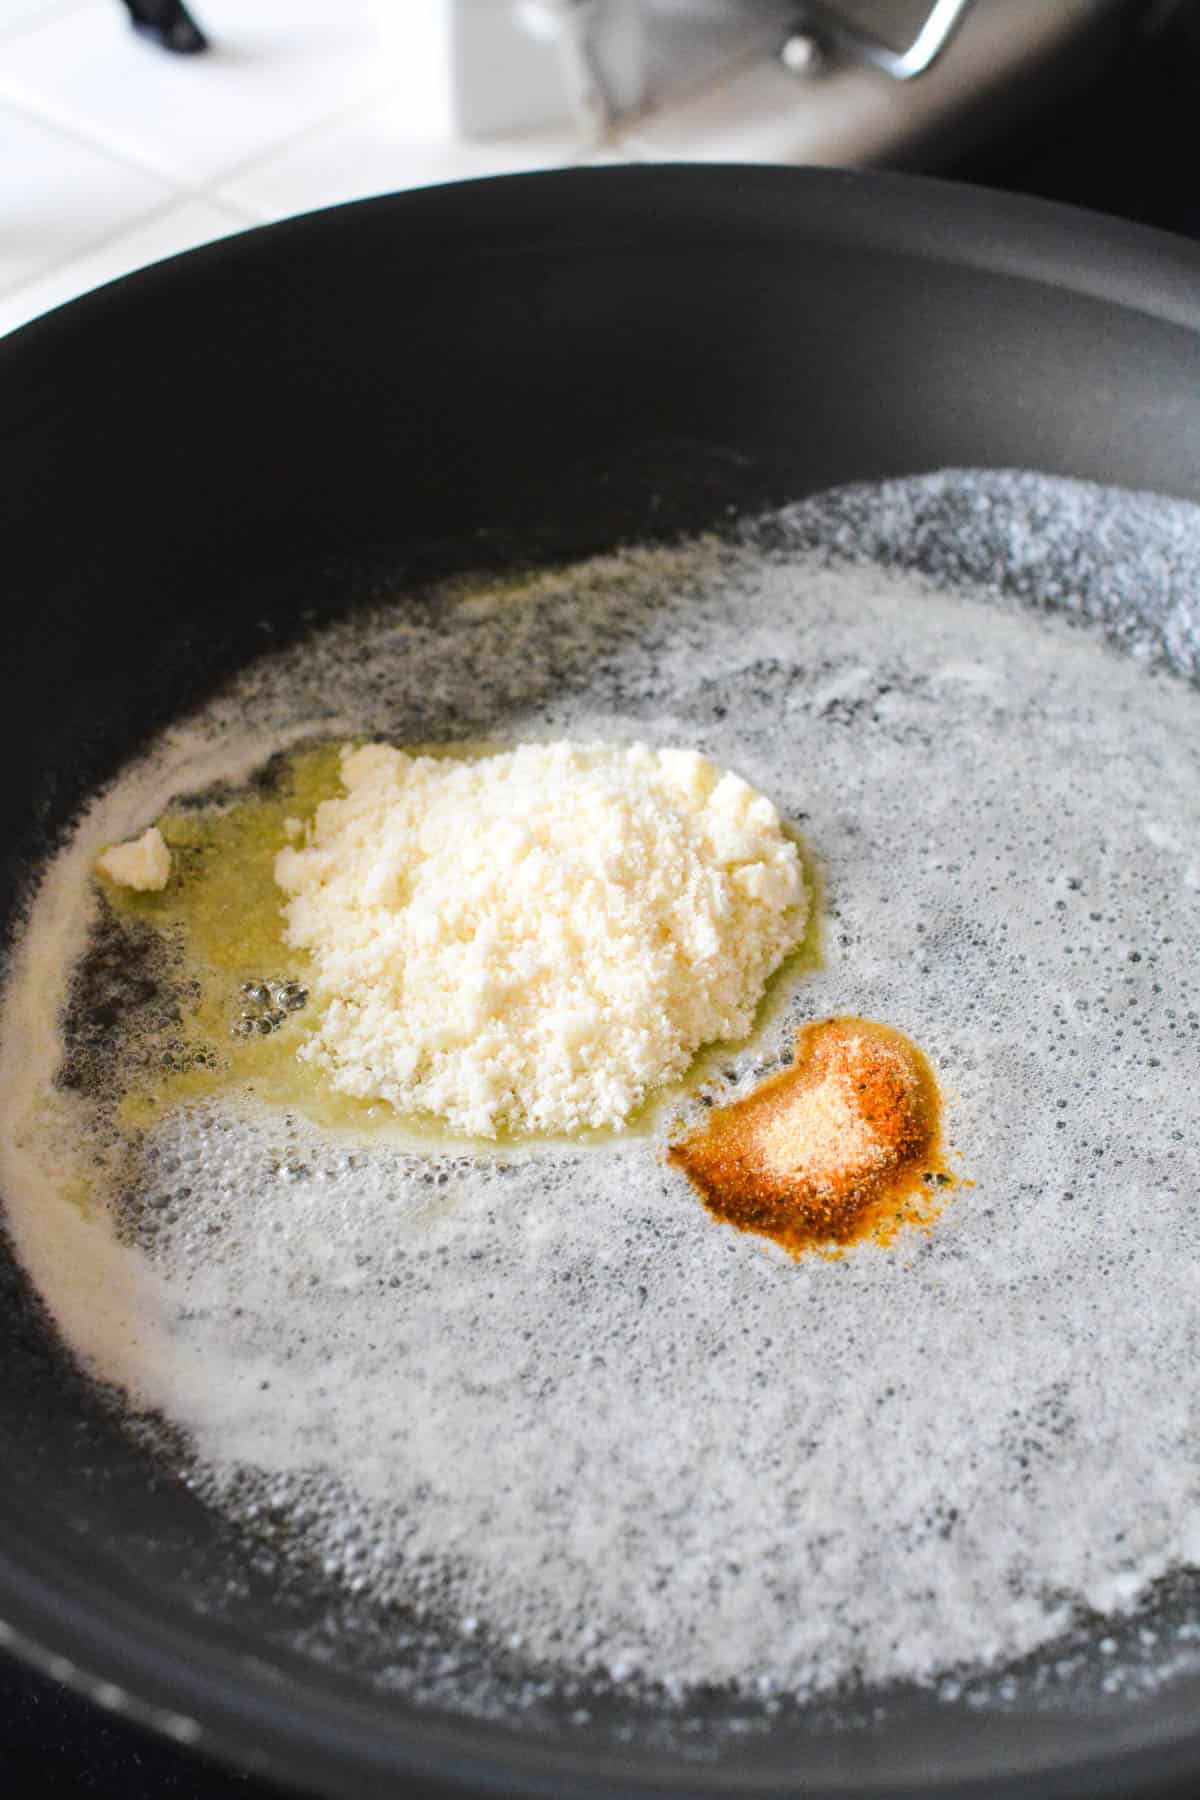 Melted butter in a pan with seasonings and parmesan cheese.